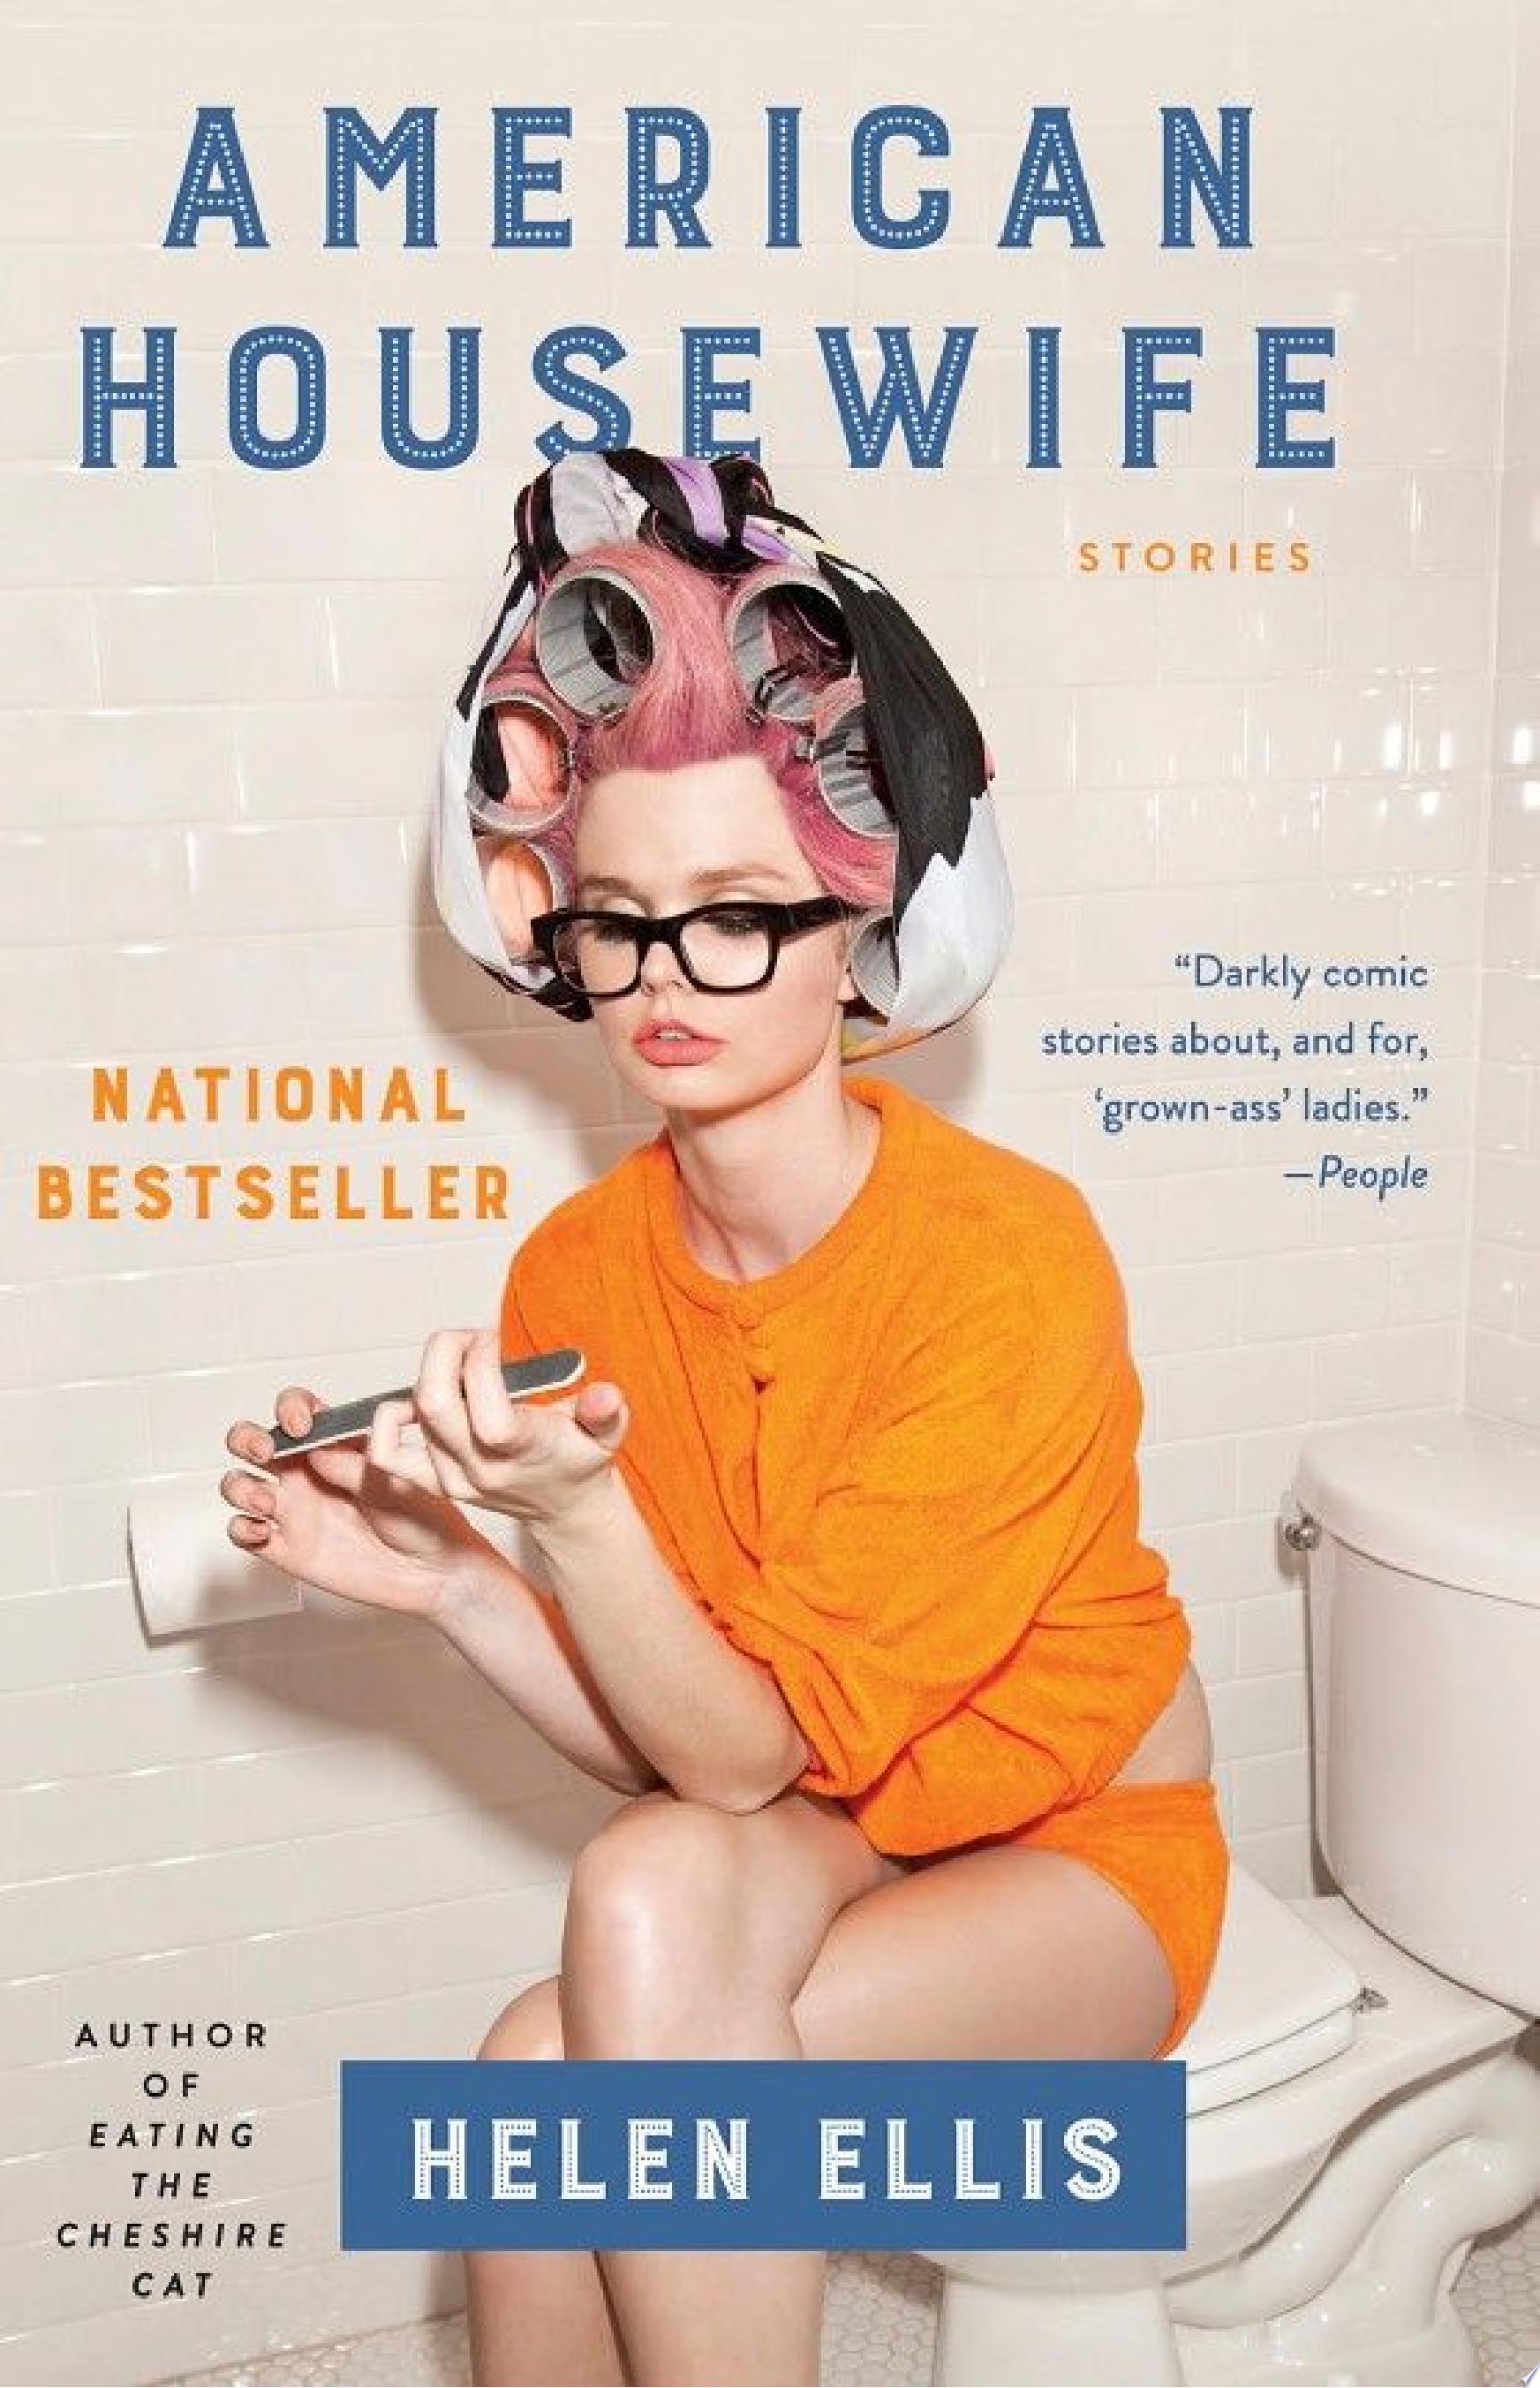 Image for "American Housewife"